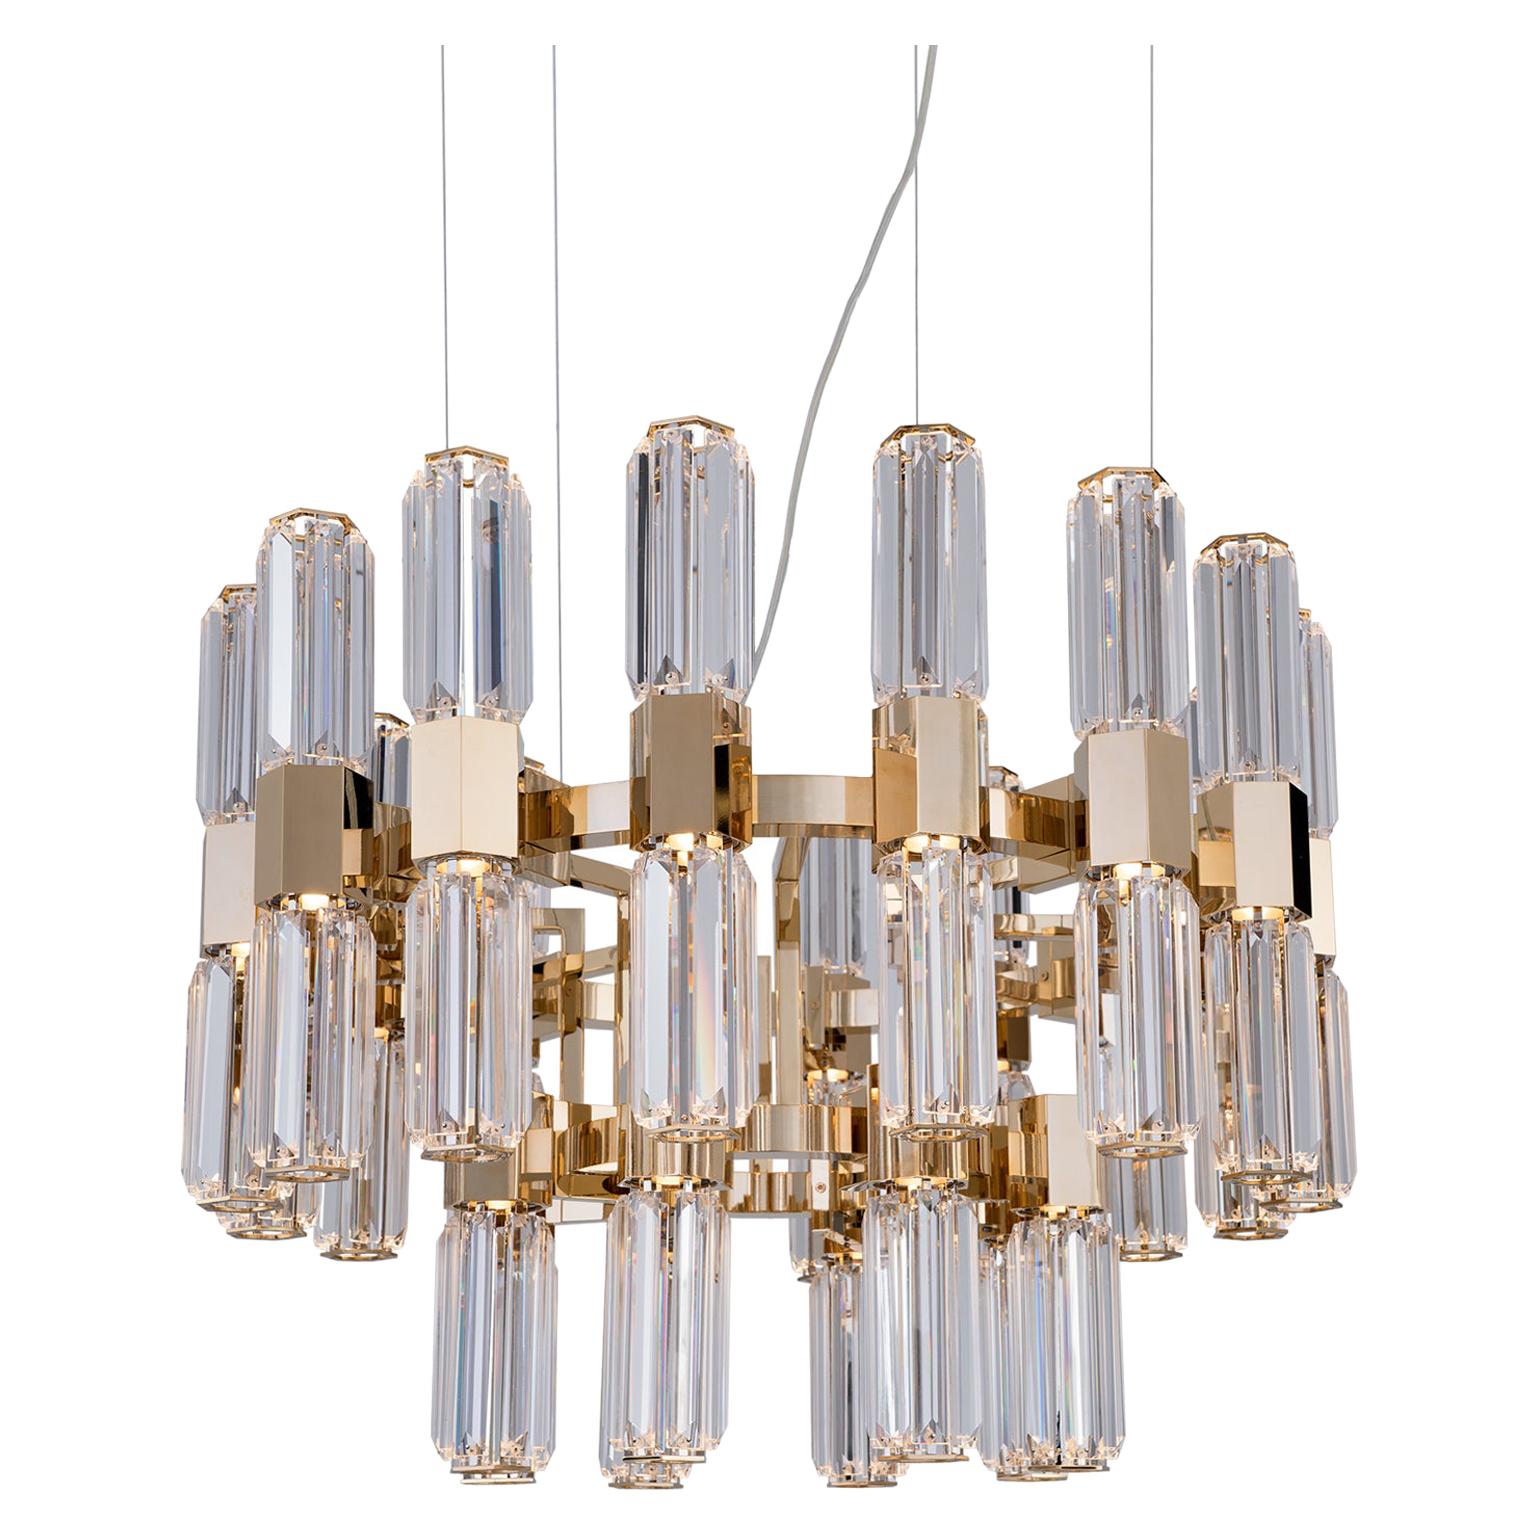 21st Century Chaos Gold-Plated and Clear Crystal Chandelier by Patrizia Garganti